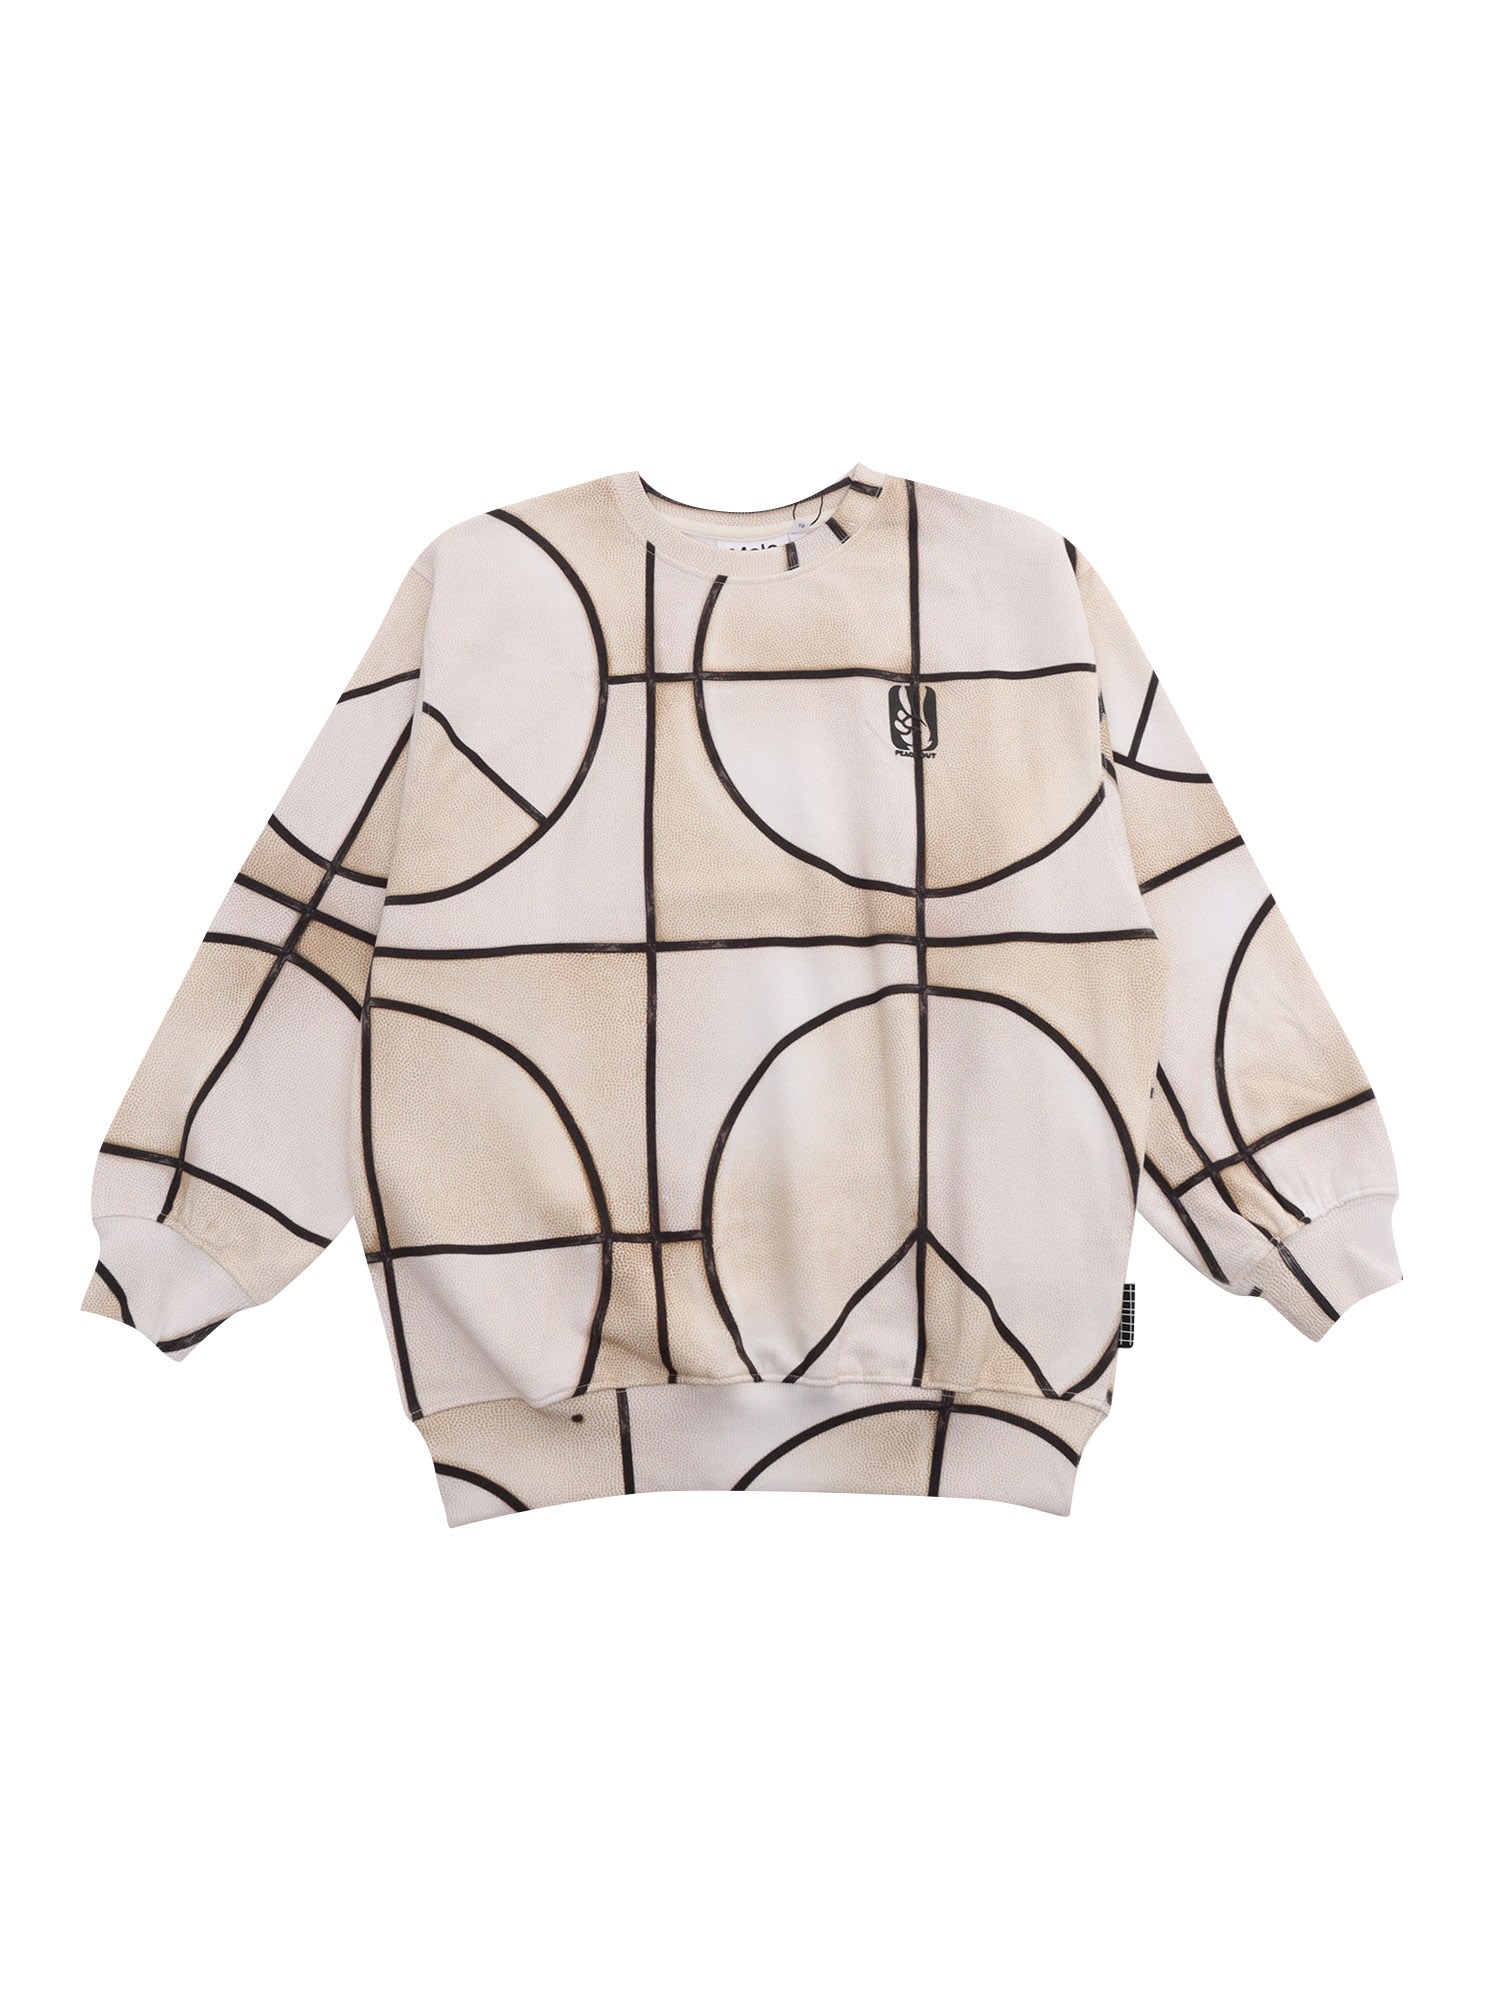 Molo Sweatshirt With Monti Pattern In Brown